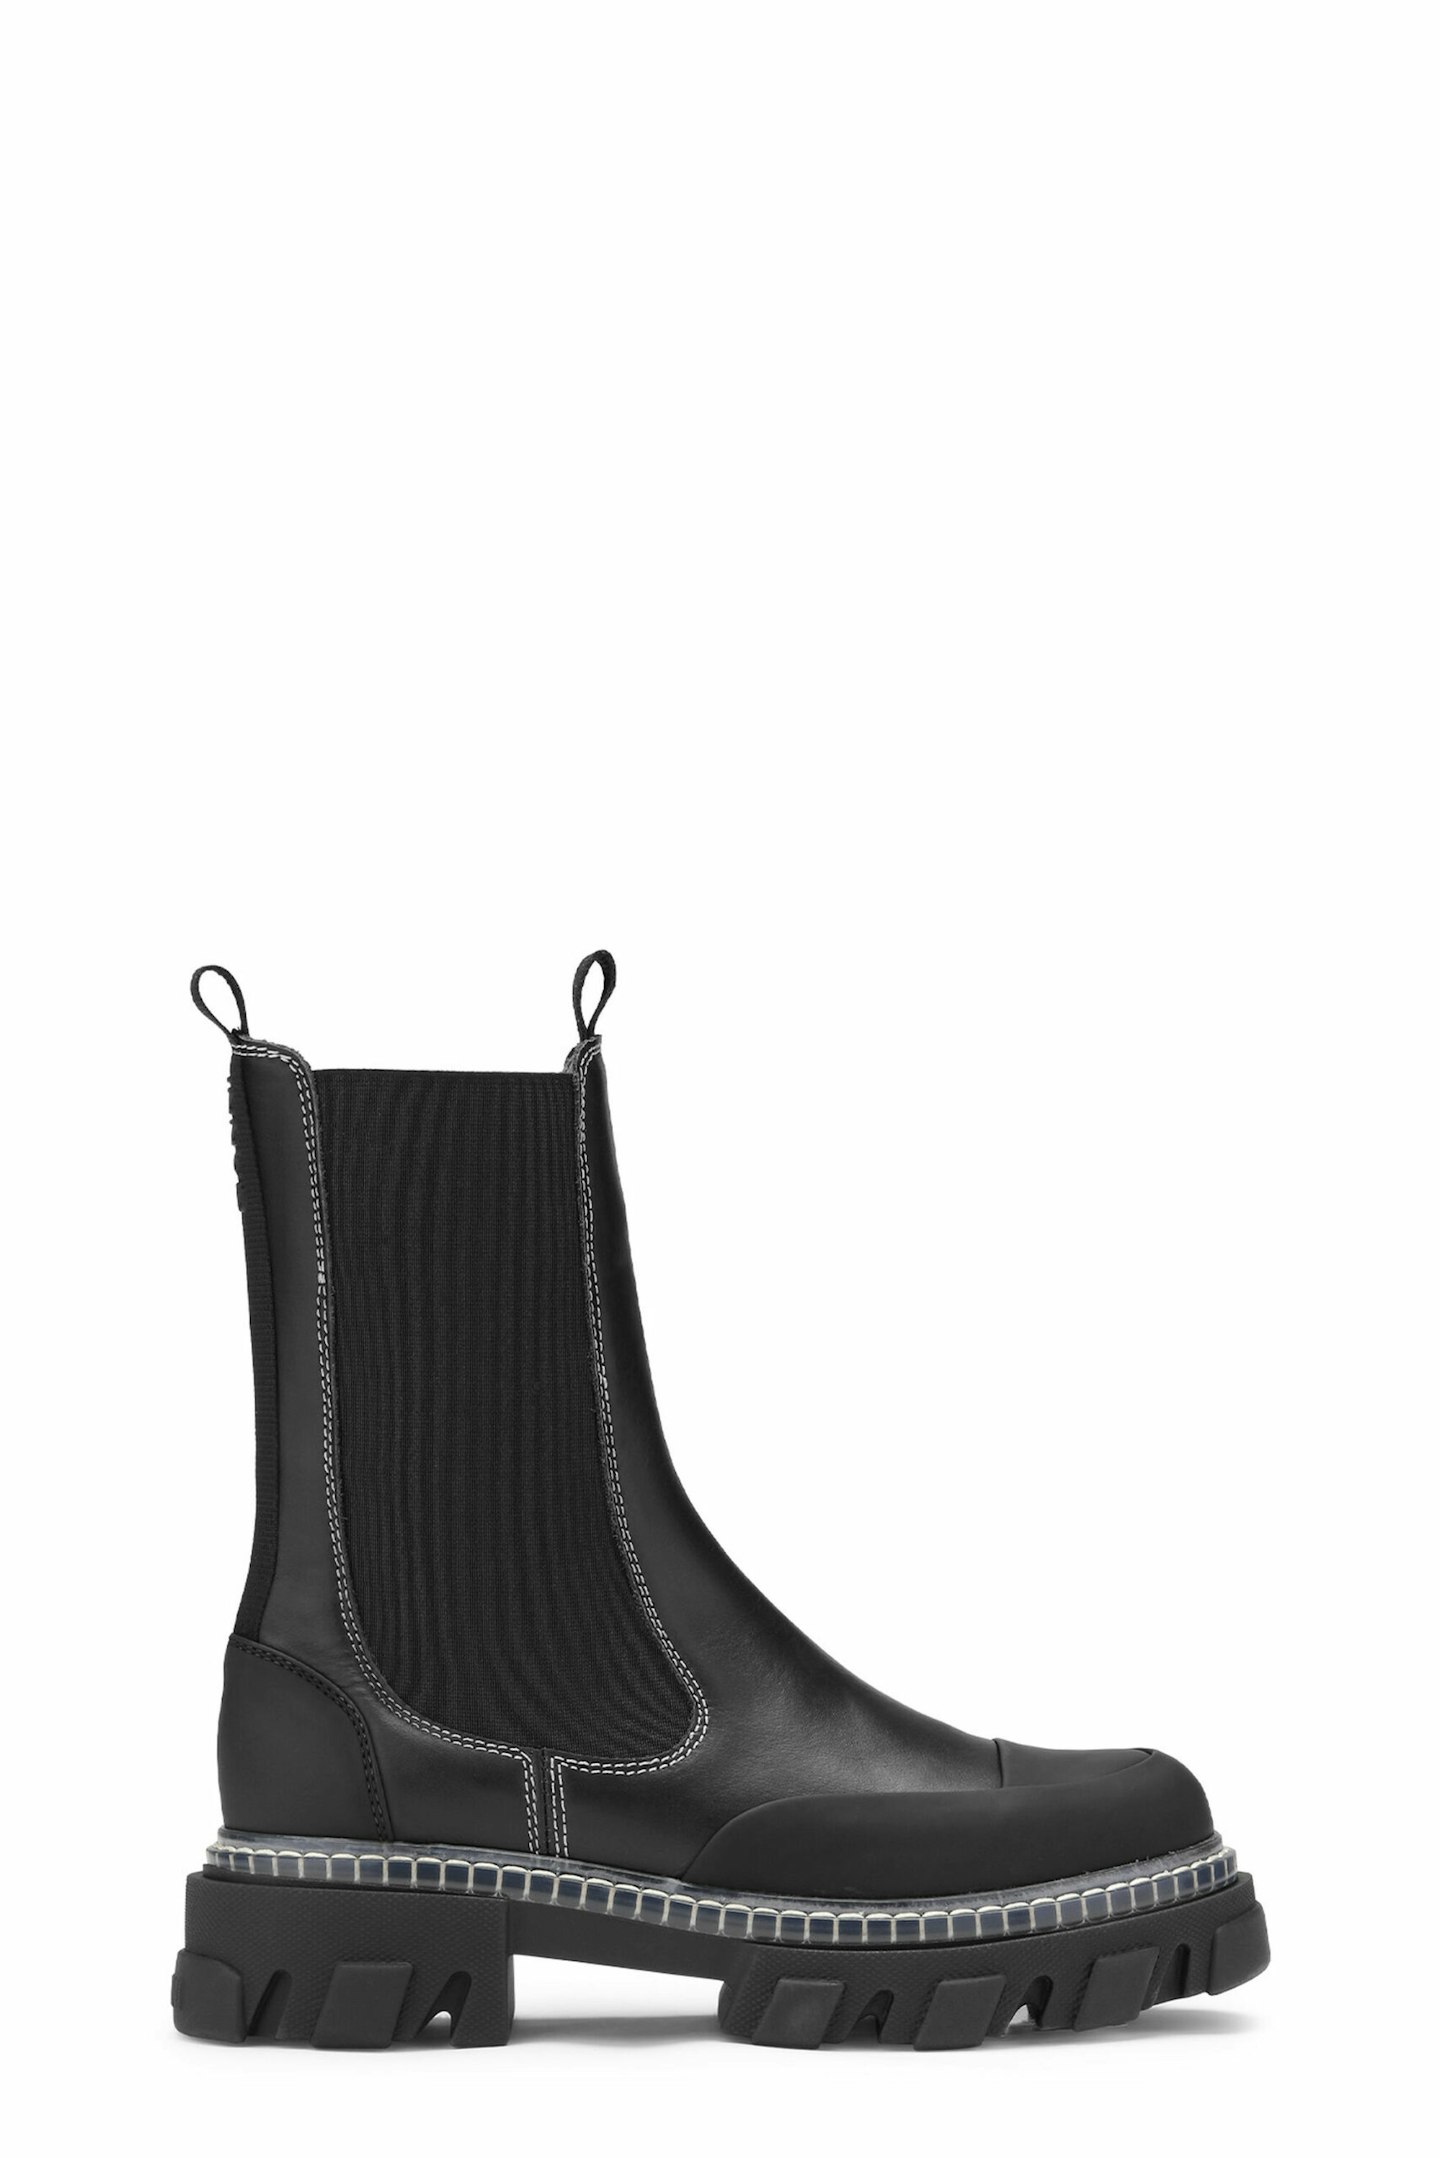 Ganni, Cleated Mid Chelsea Boots